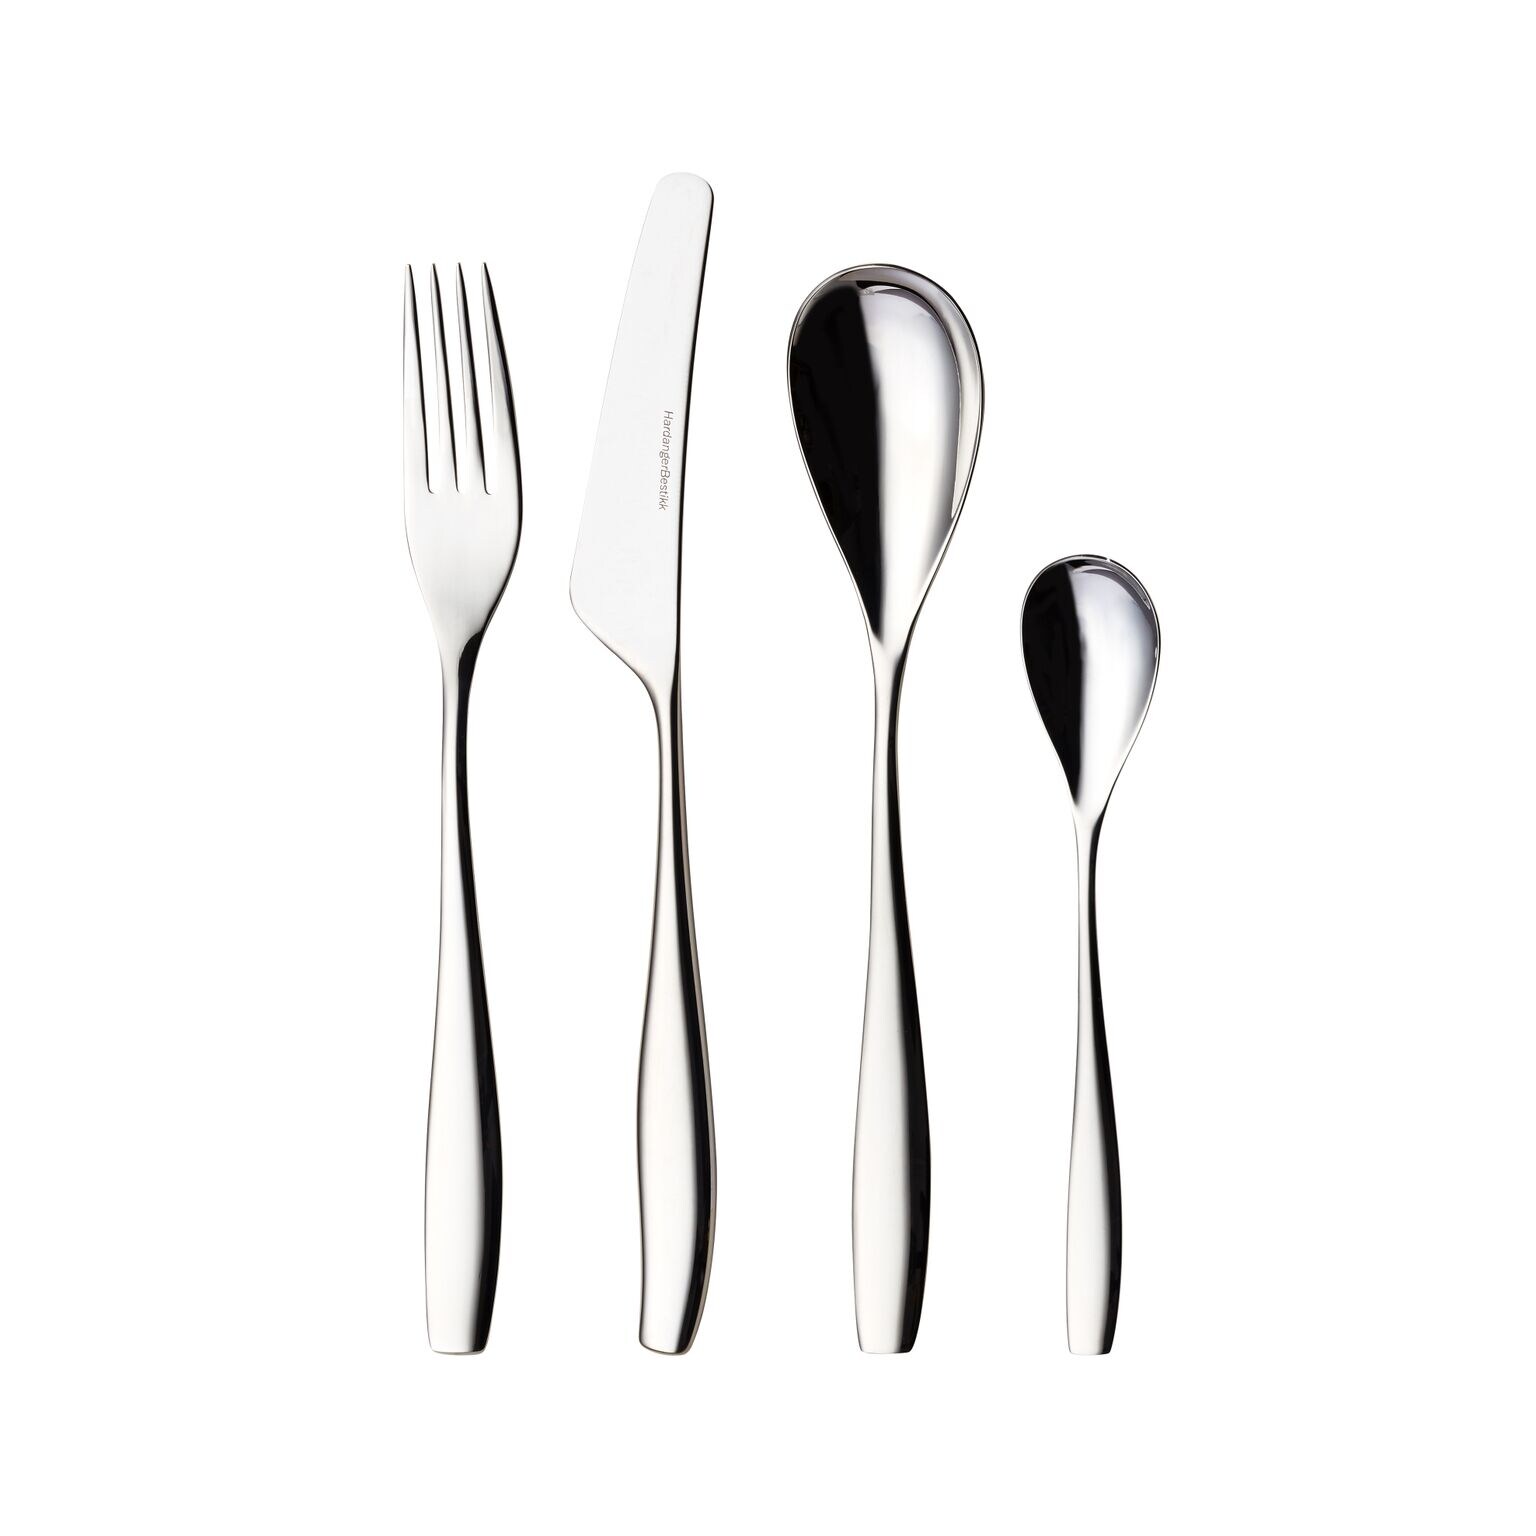 Stainless Steel Thomas Loft Cutlery Pastry Forks 12 Piece Set 